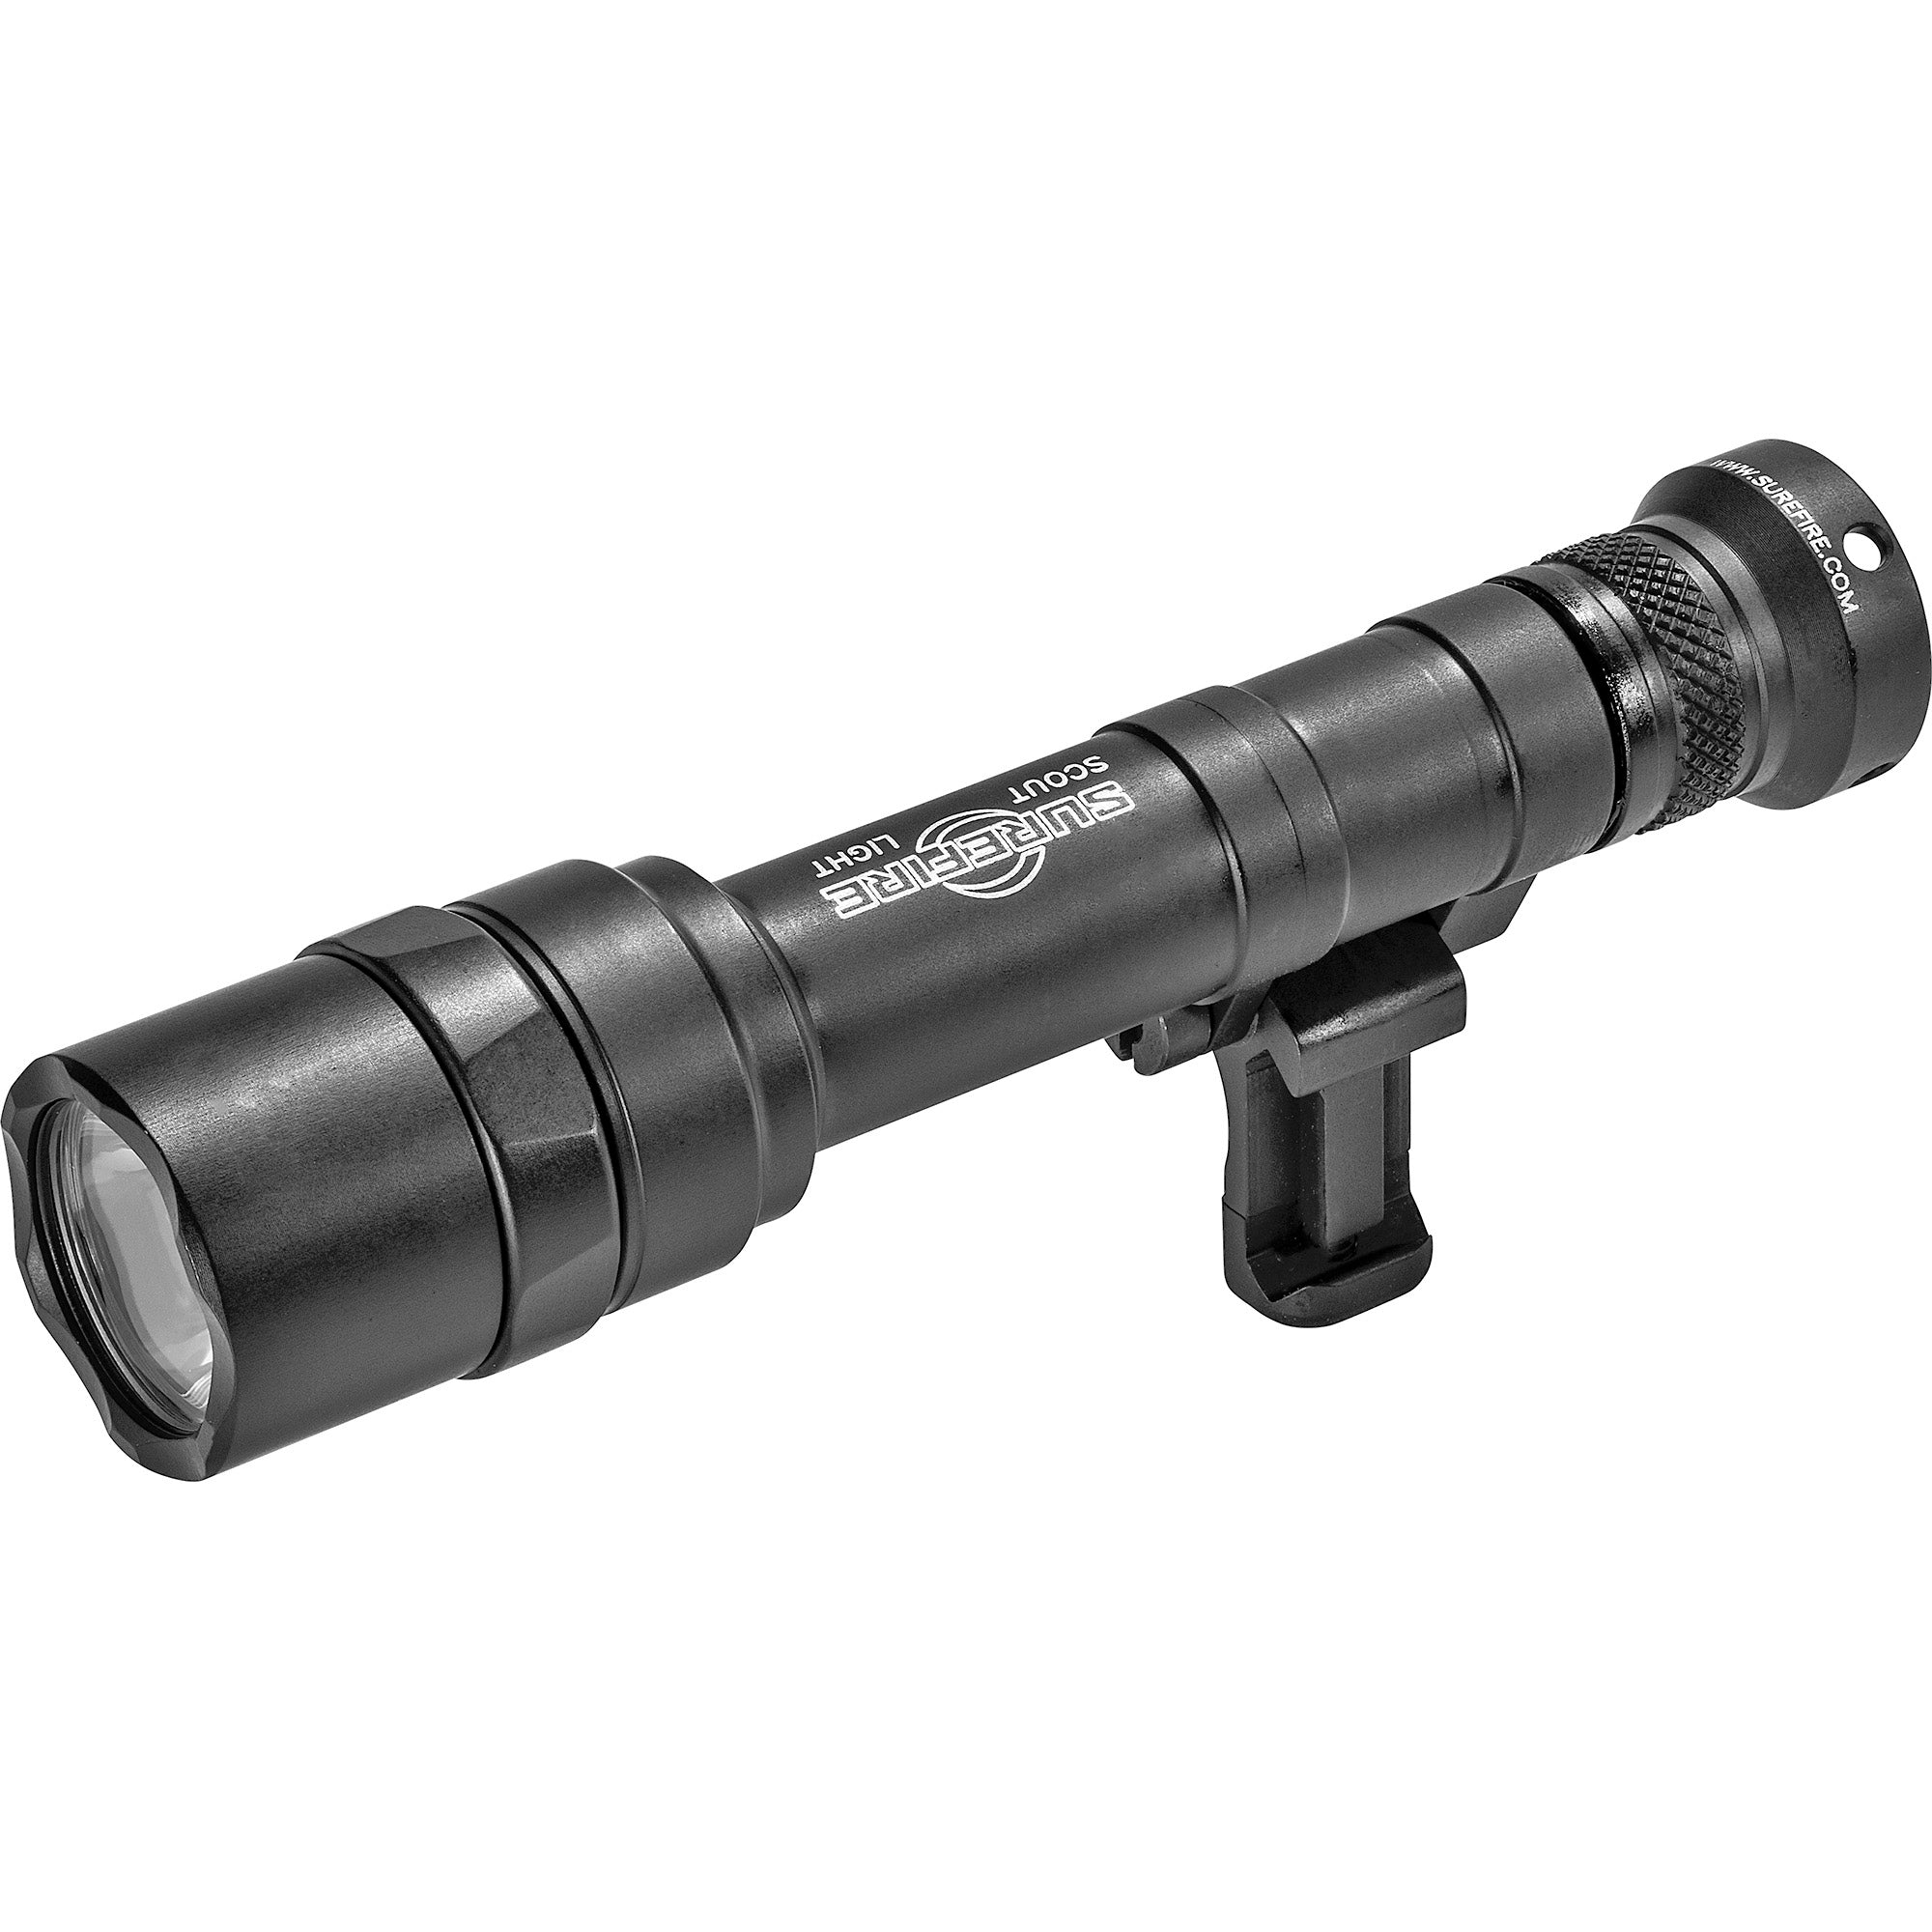 Surefire M640U Scout Pro Flashlight in black, emitting 1000 lumens, equipped with both 1913 Picatinny and M-LOK mounts, and featuring a Z68 On/Off tailcap.